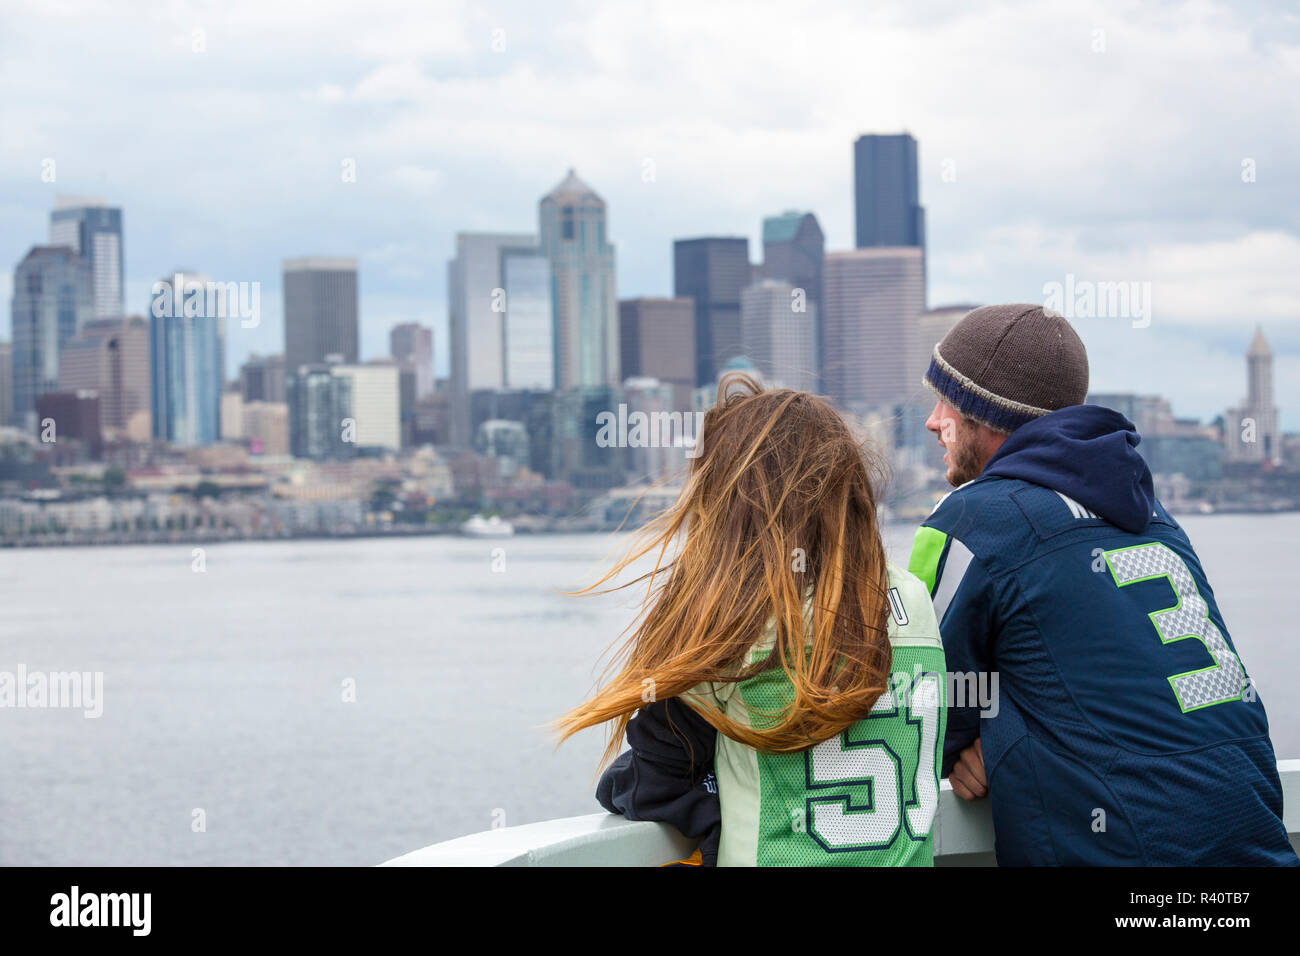 USA, Washington State, Seattle. Passengers on a ferry approaching downtown Seattle, wearing shirts supporting the Seattle Seahawks football team. Stock Photo